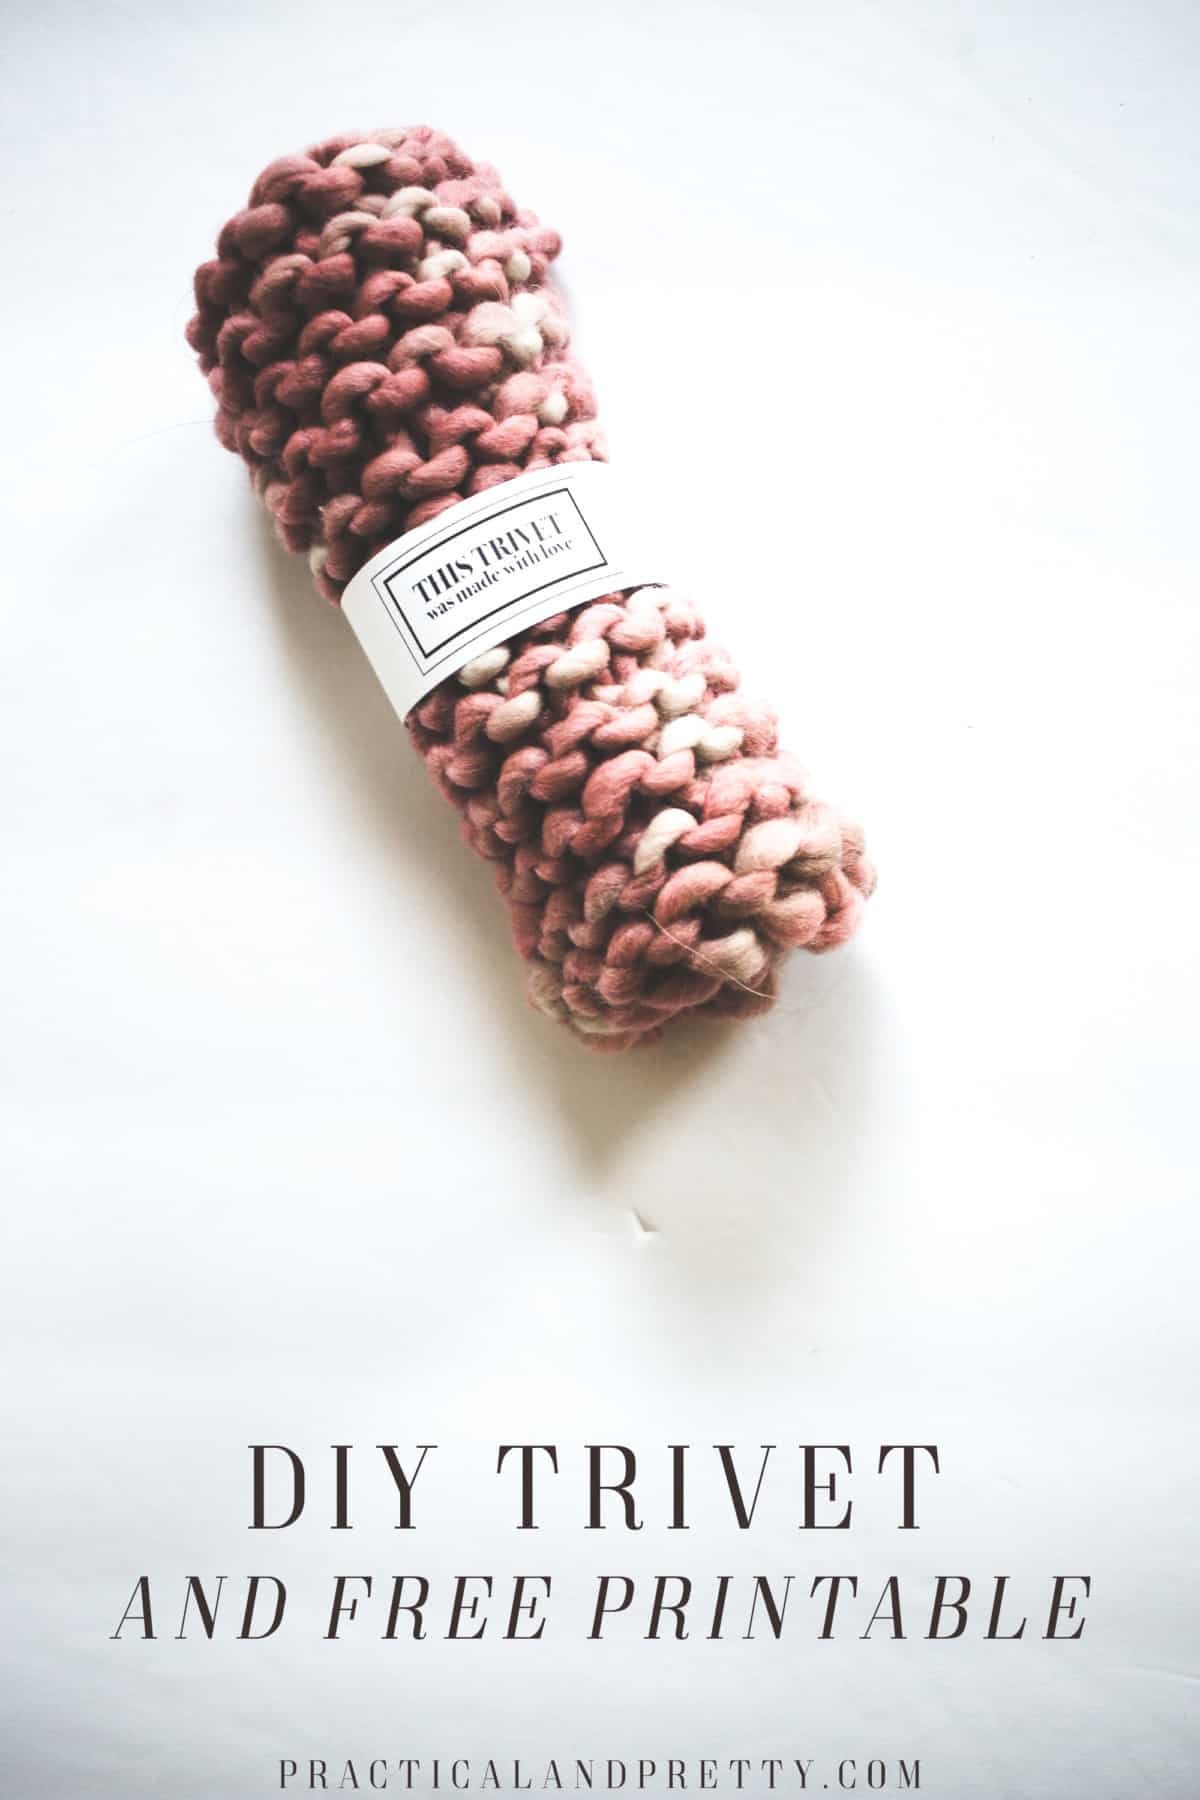 Knitting a trivet is literally one of the easiest knitting projects you can do and so I made you a free printable to gift them away!